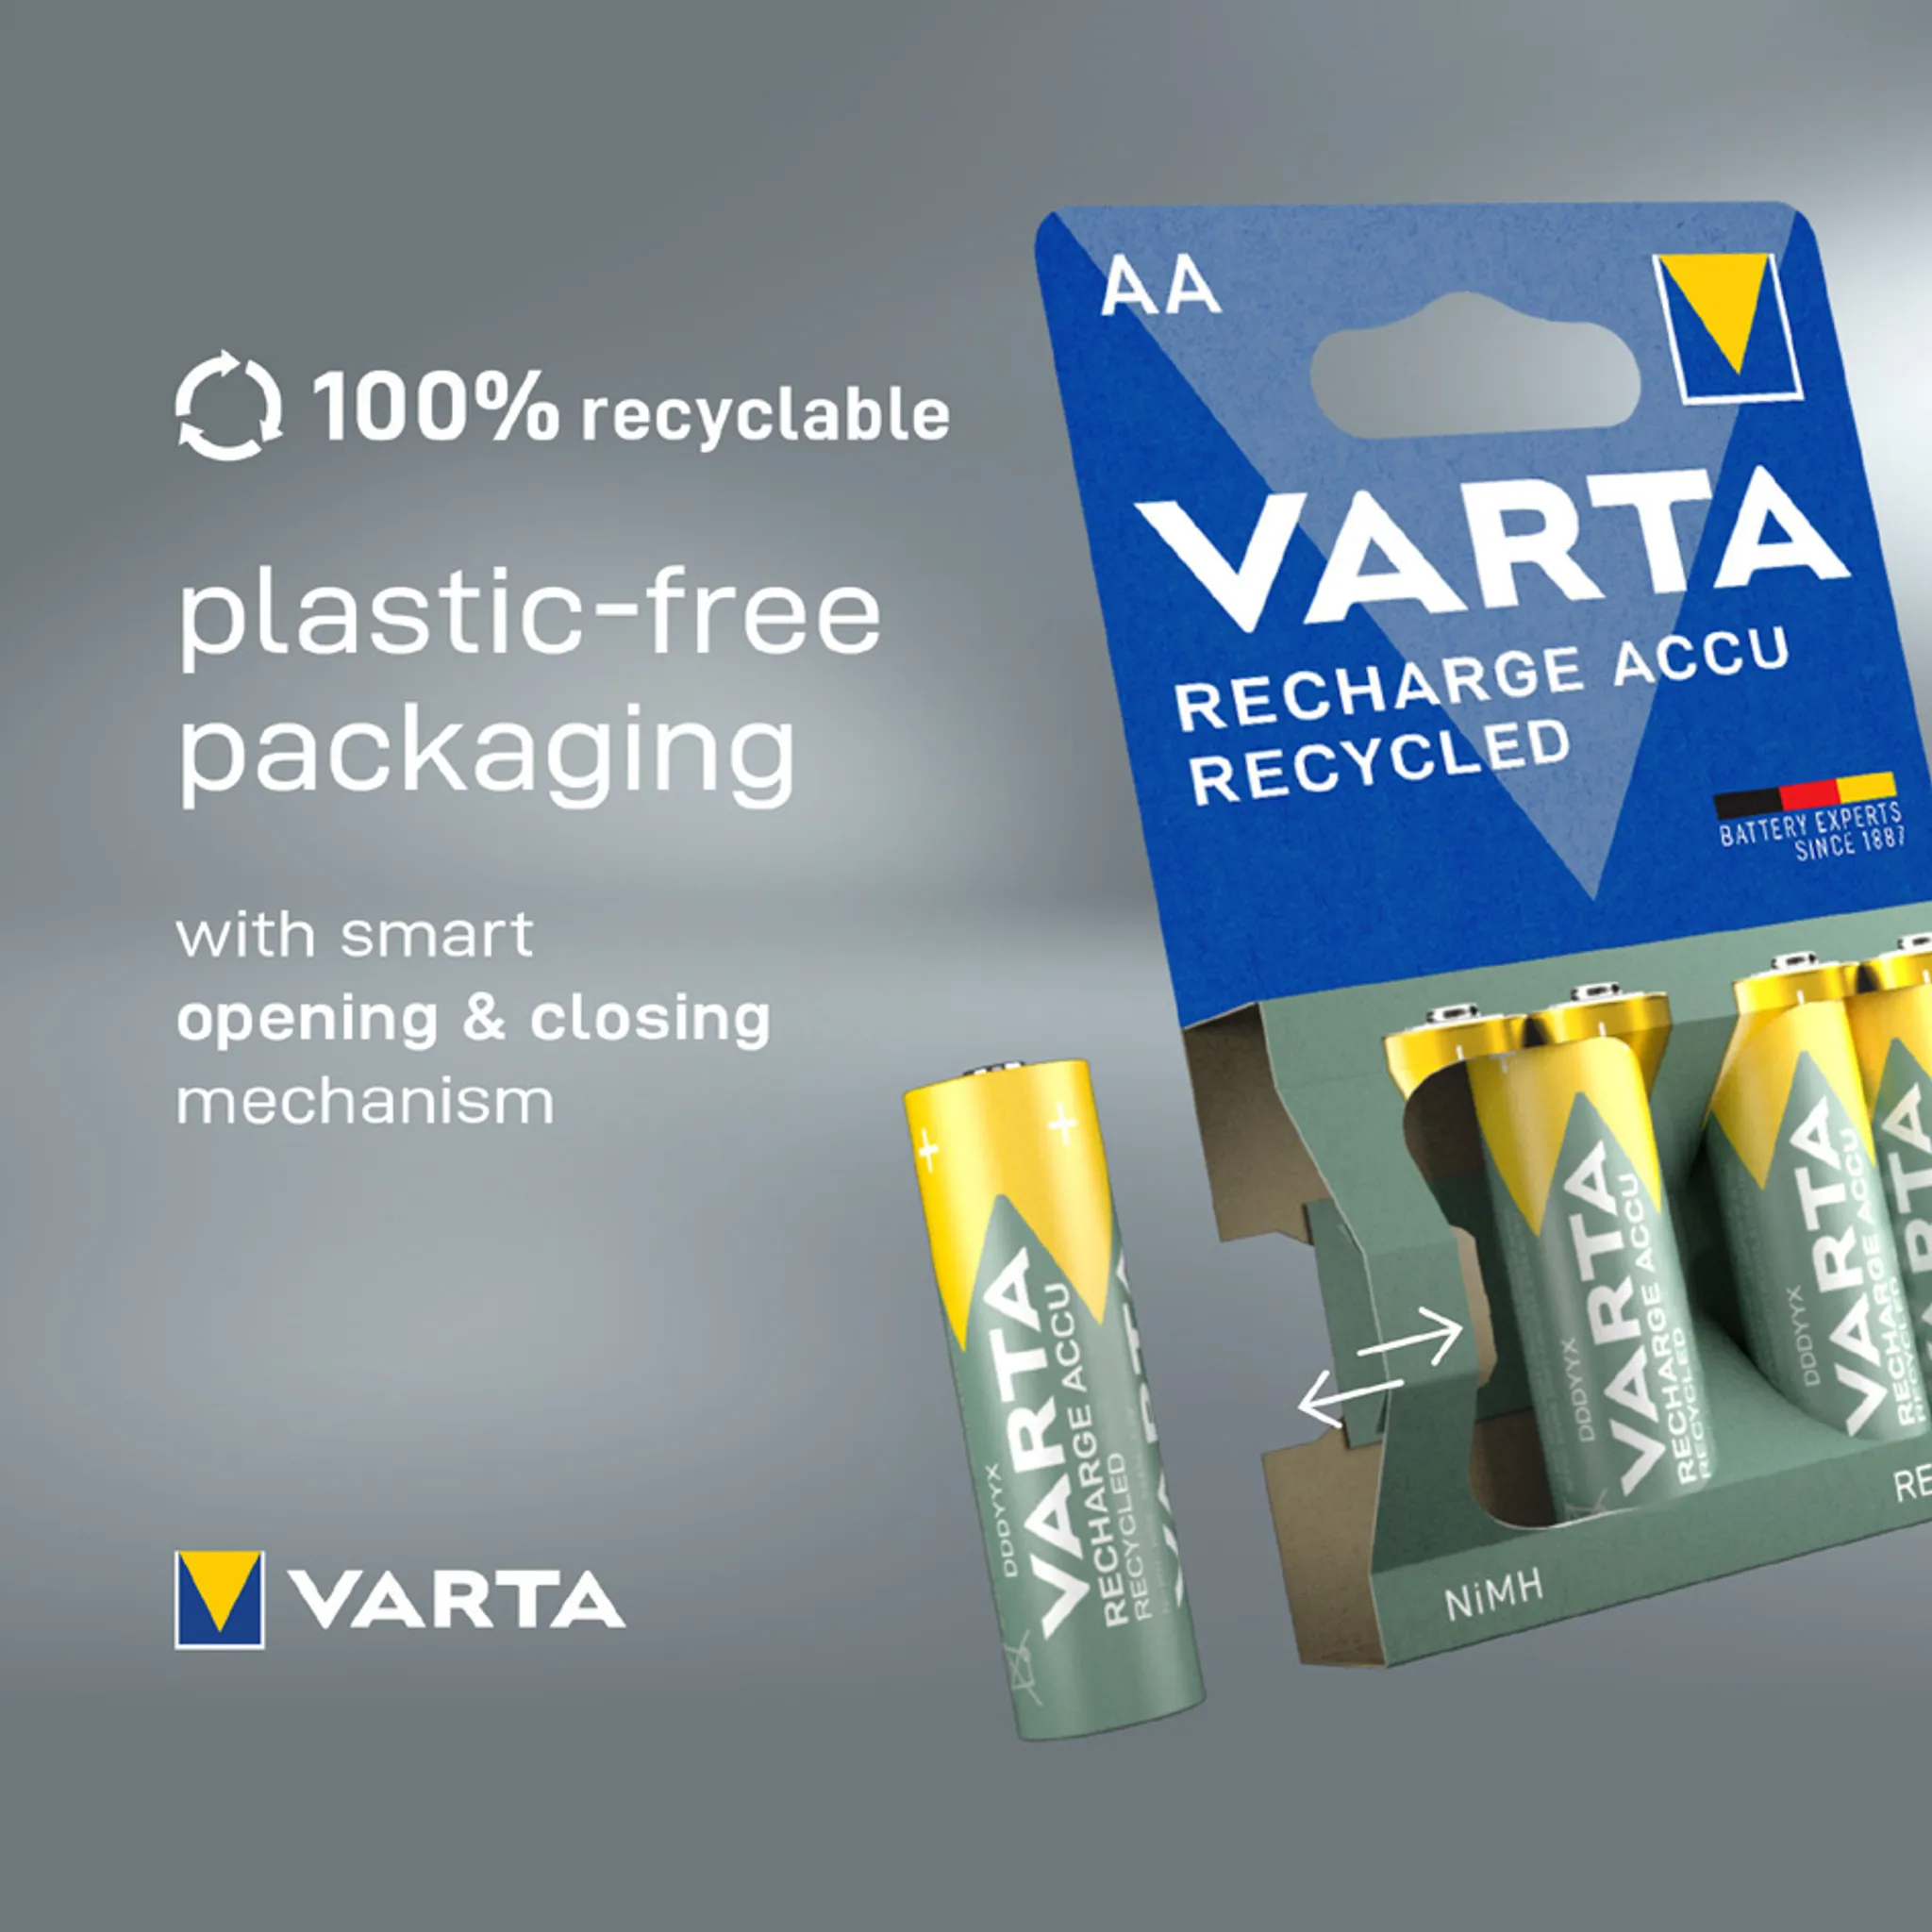 Varta Recharge Accu Recycled - 56816 Batterie